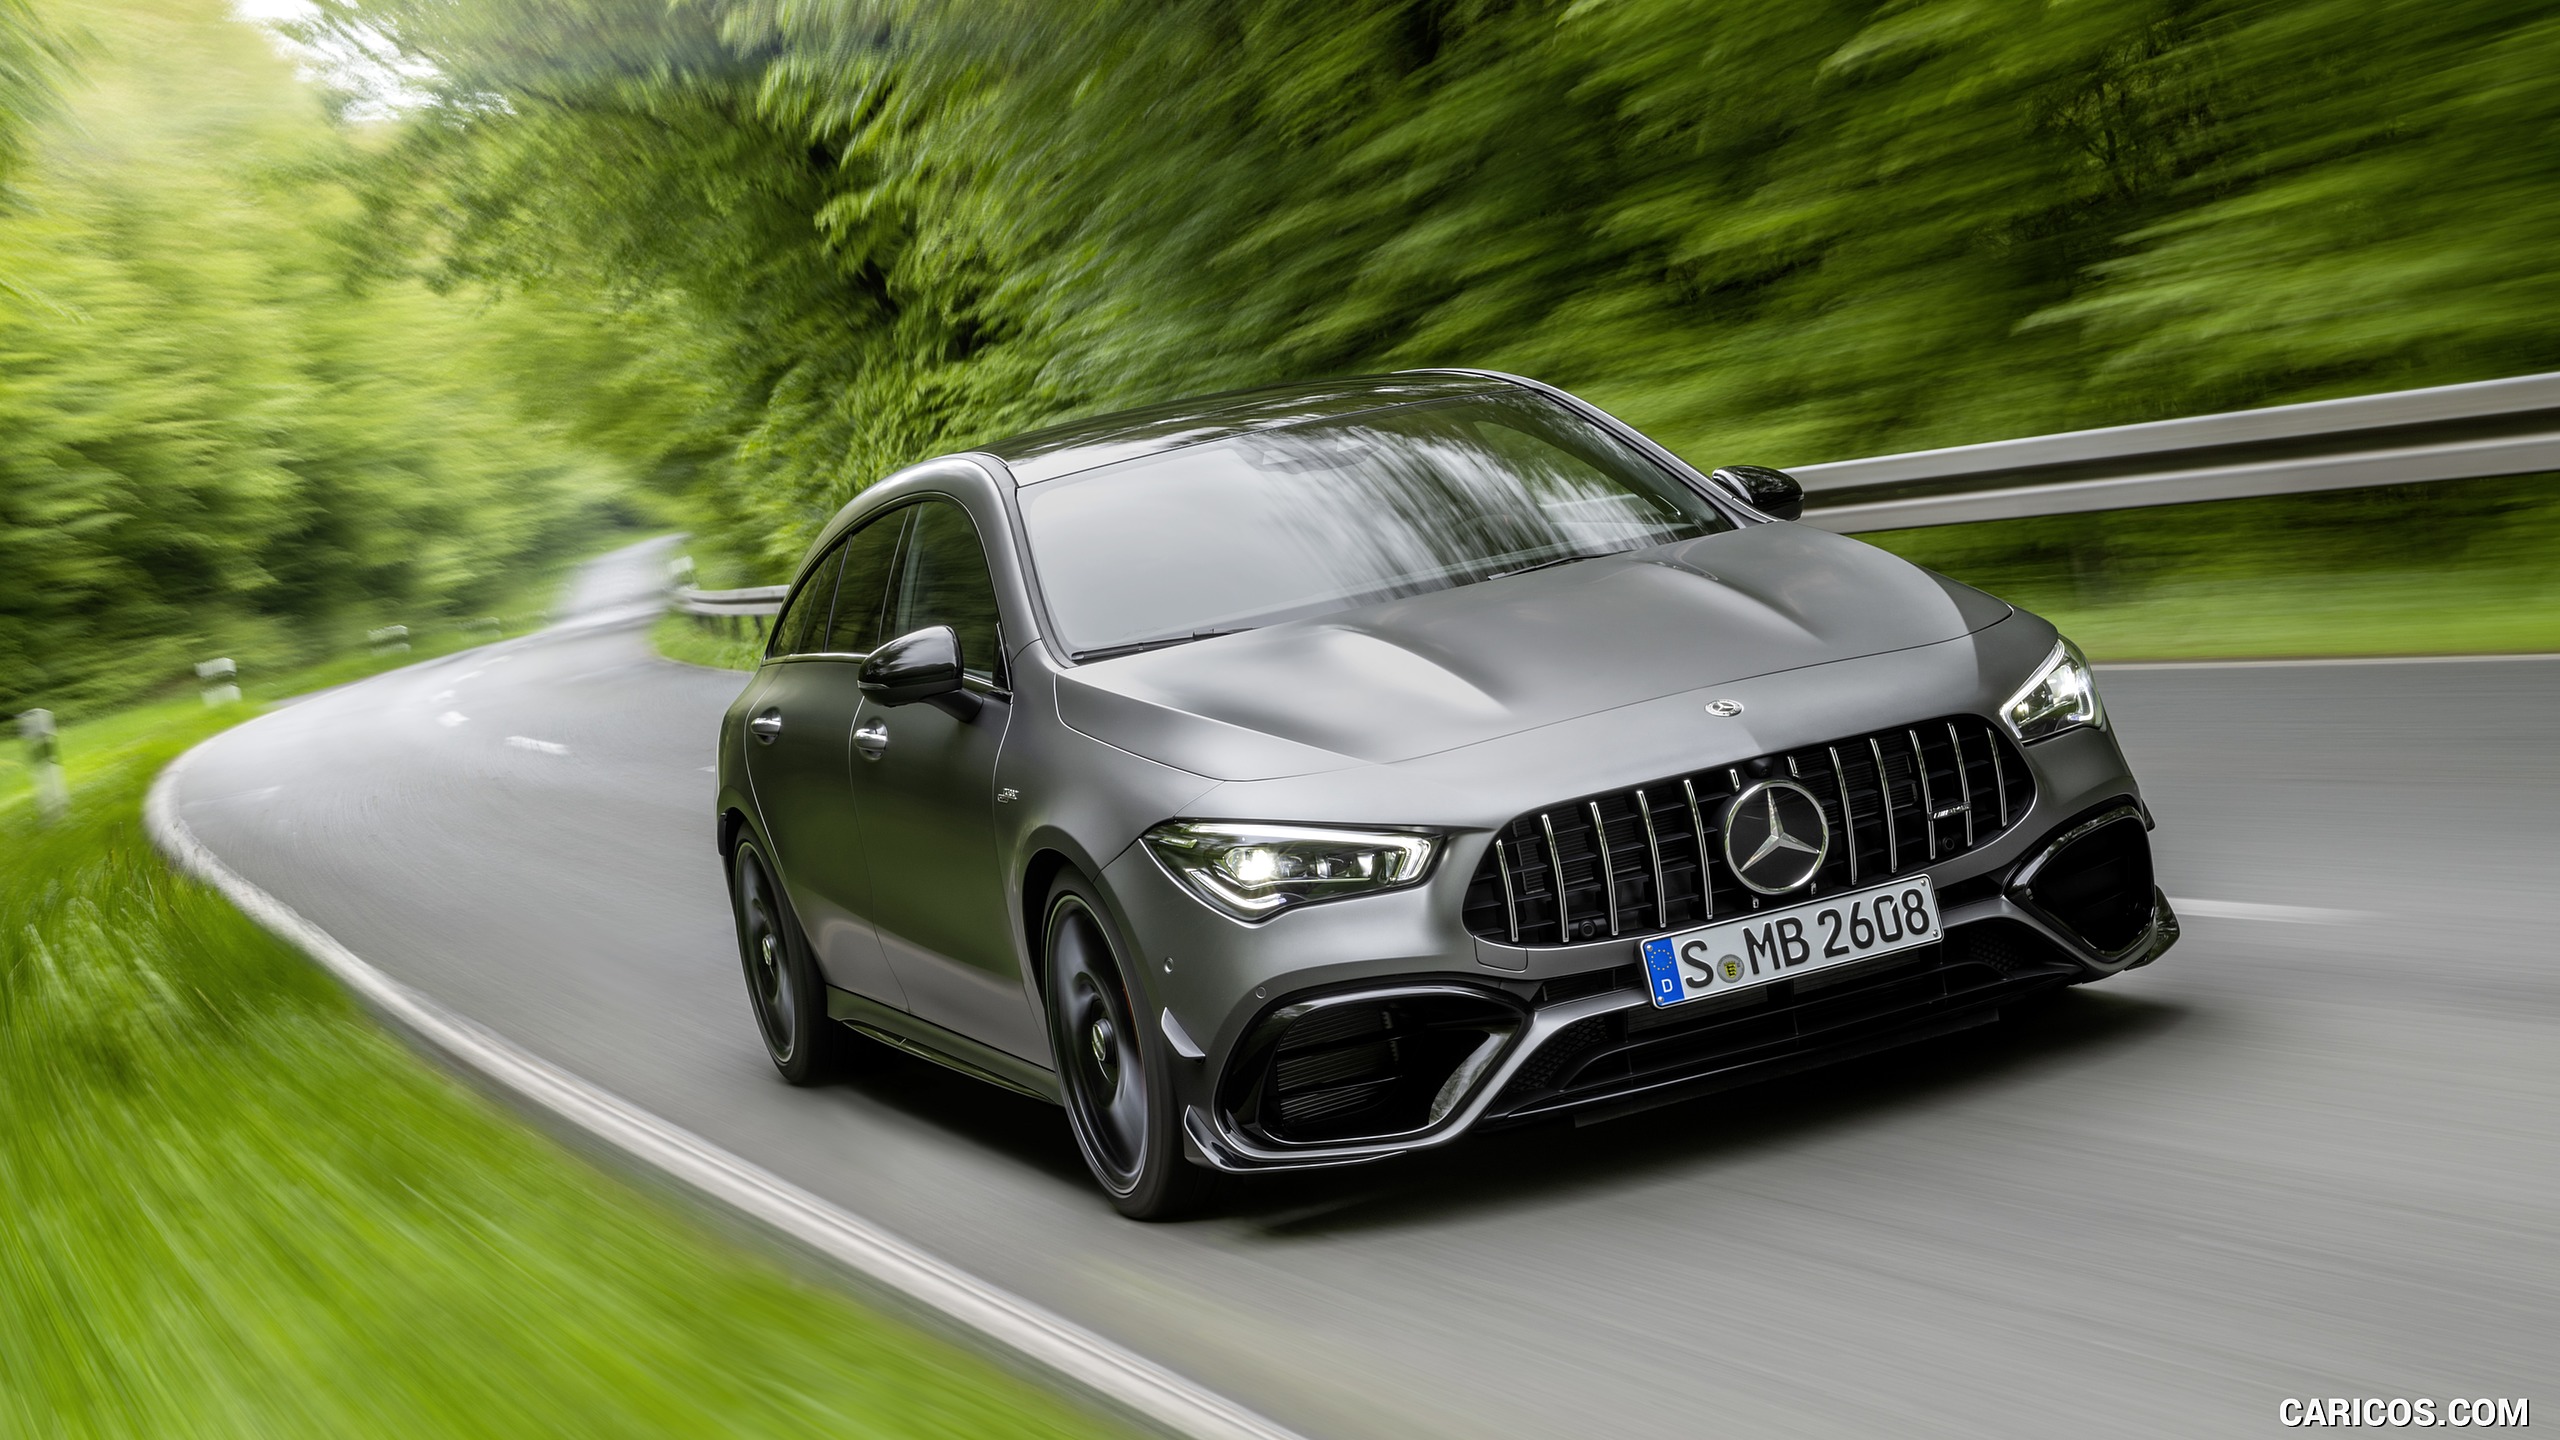 2020 Mercedes-AMG CLA 45 S 4MATIC+ Shooting Brake - Front, #7 of 35